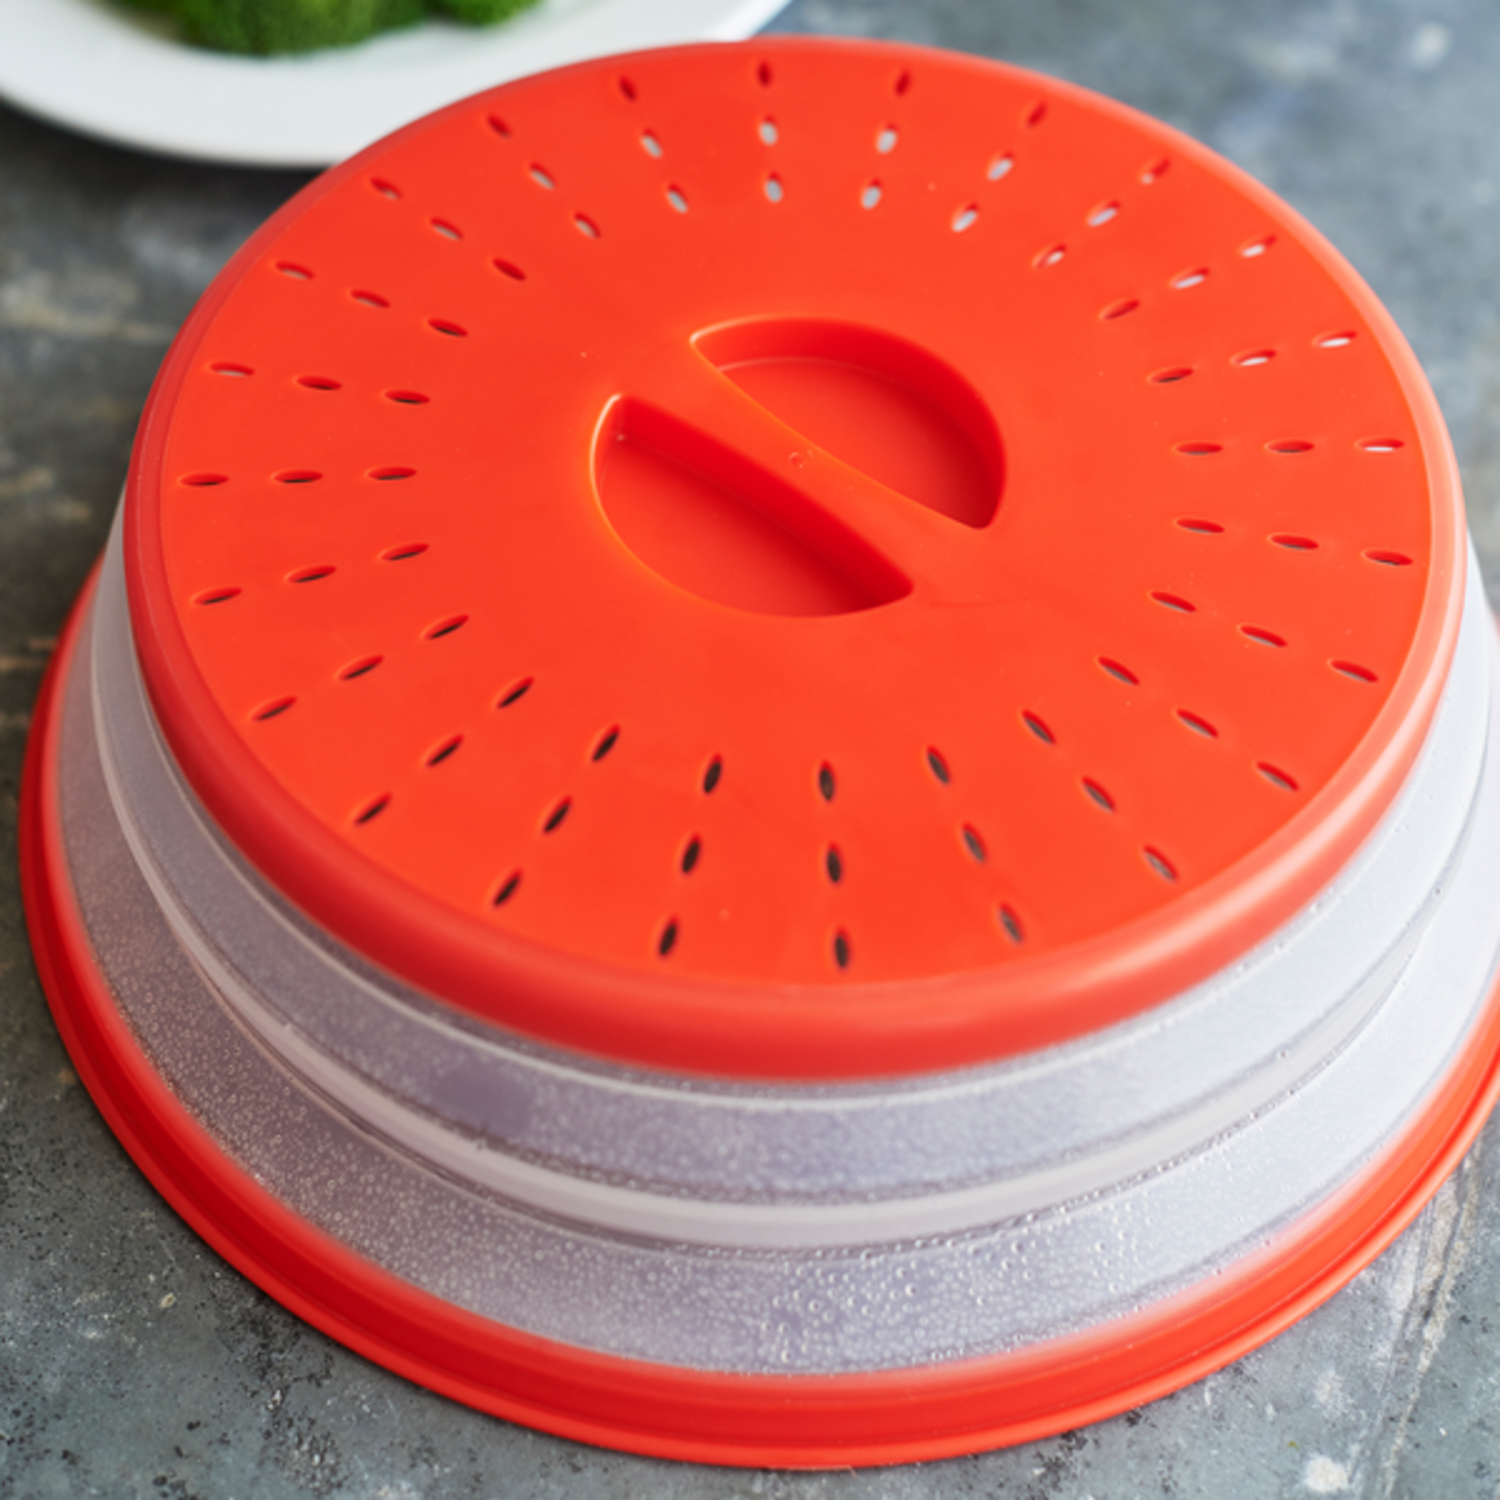 Tovolo microwave cover prevents food splatter